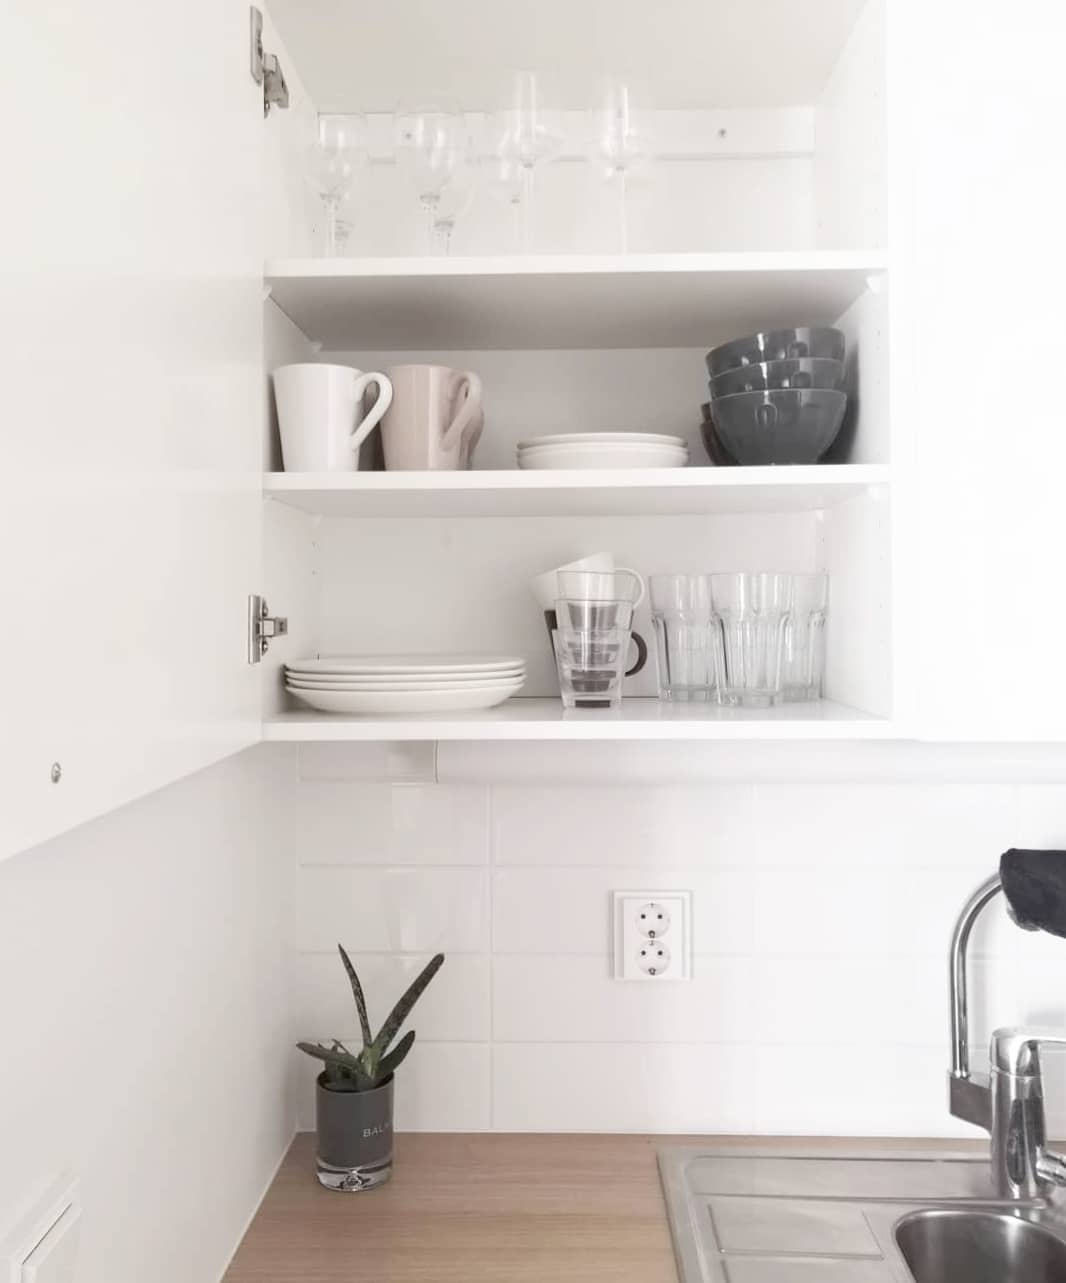 Utility Kitchen Canisters - White, Kitchen Storage Solutions